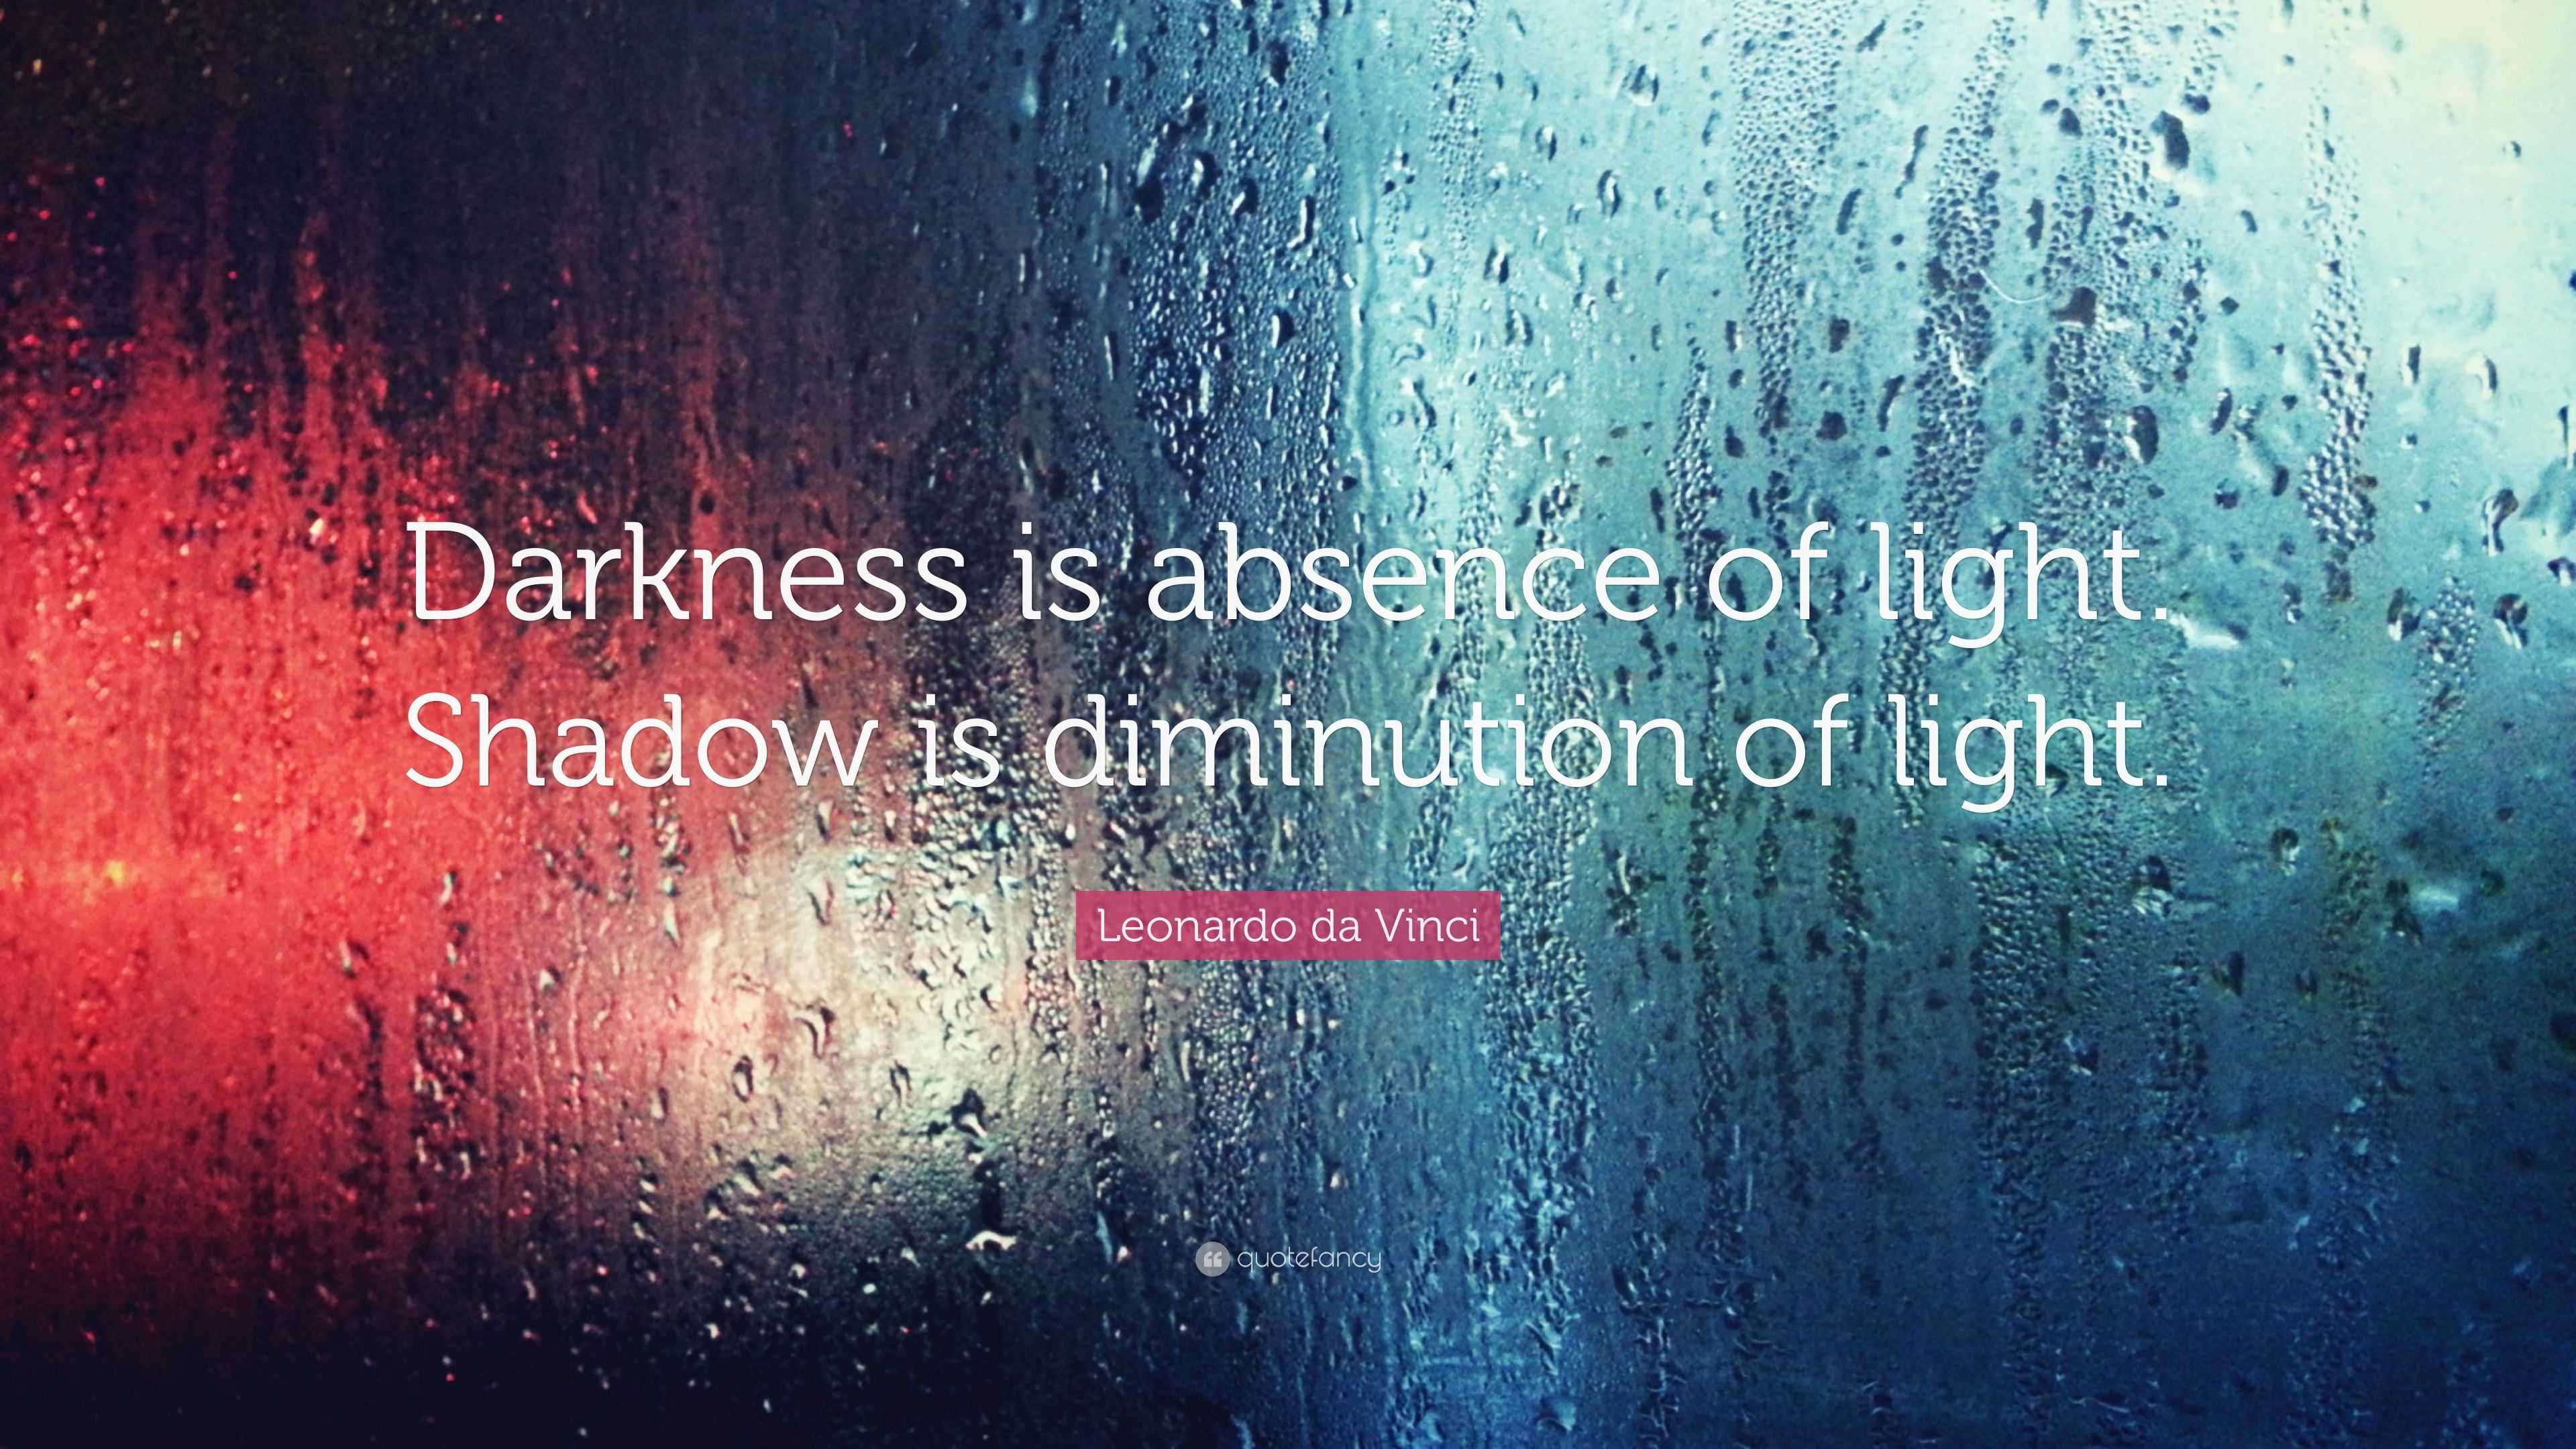 is darkness the absence of light